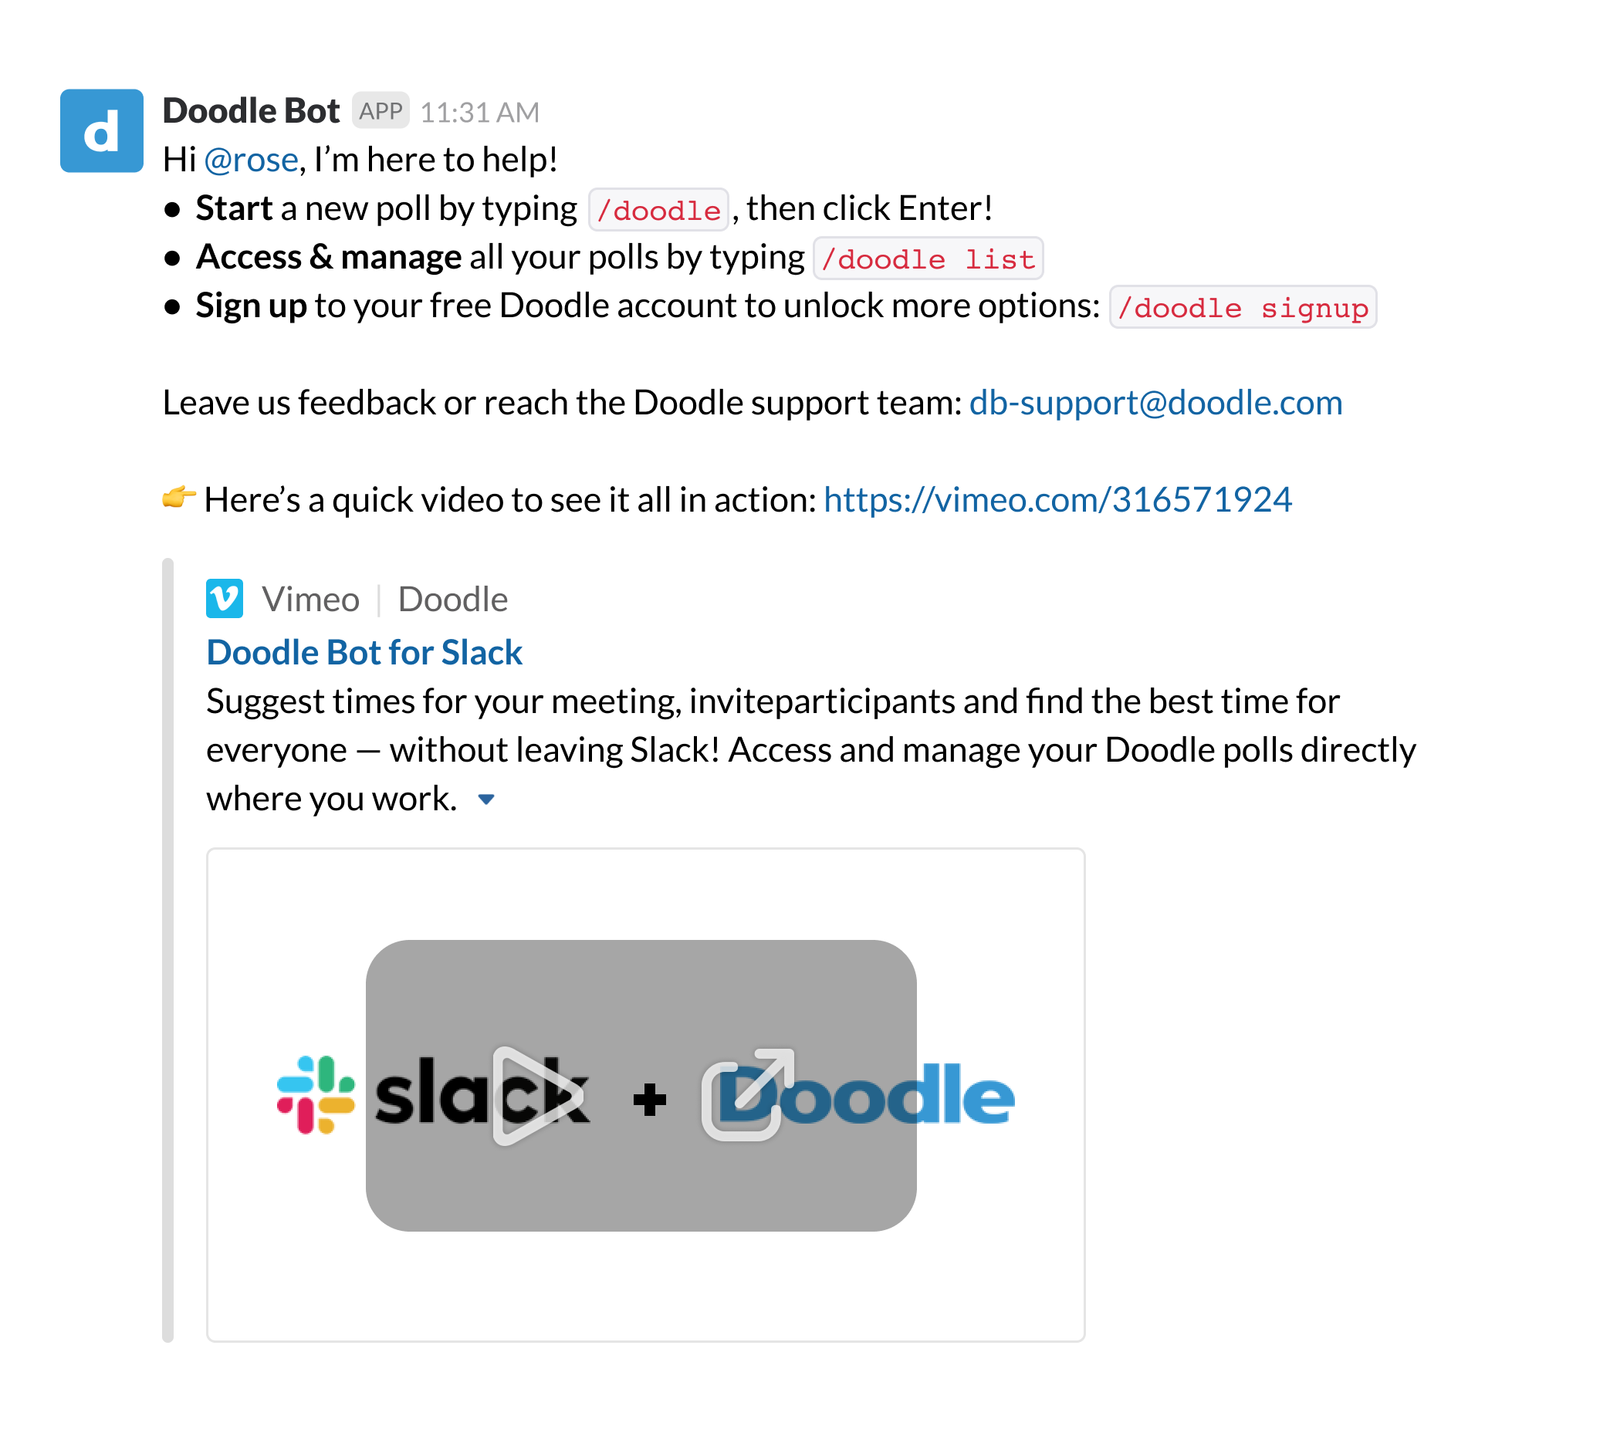 Doodle Bot offering list of helpful tips with embedded video